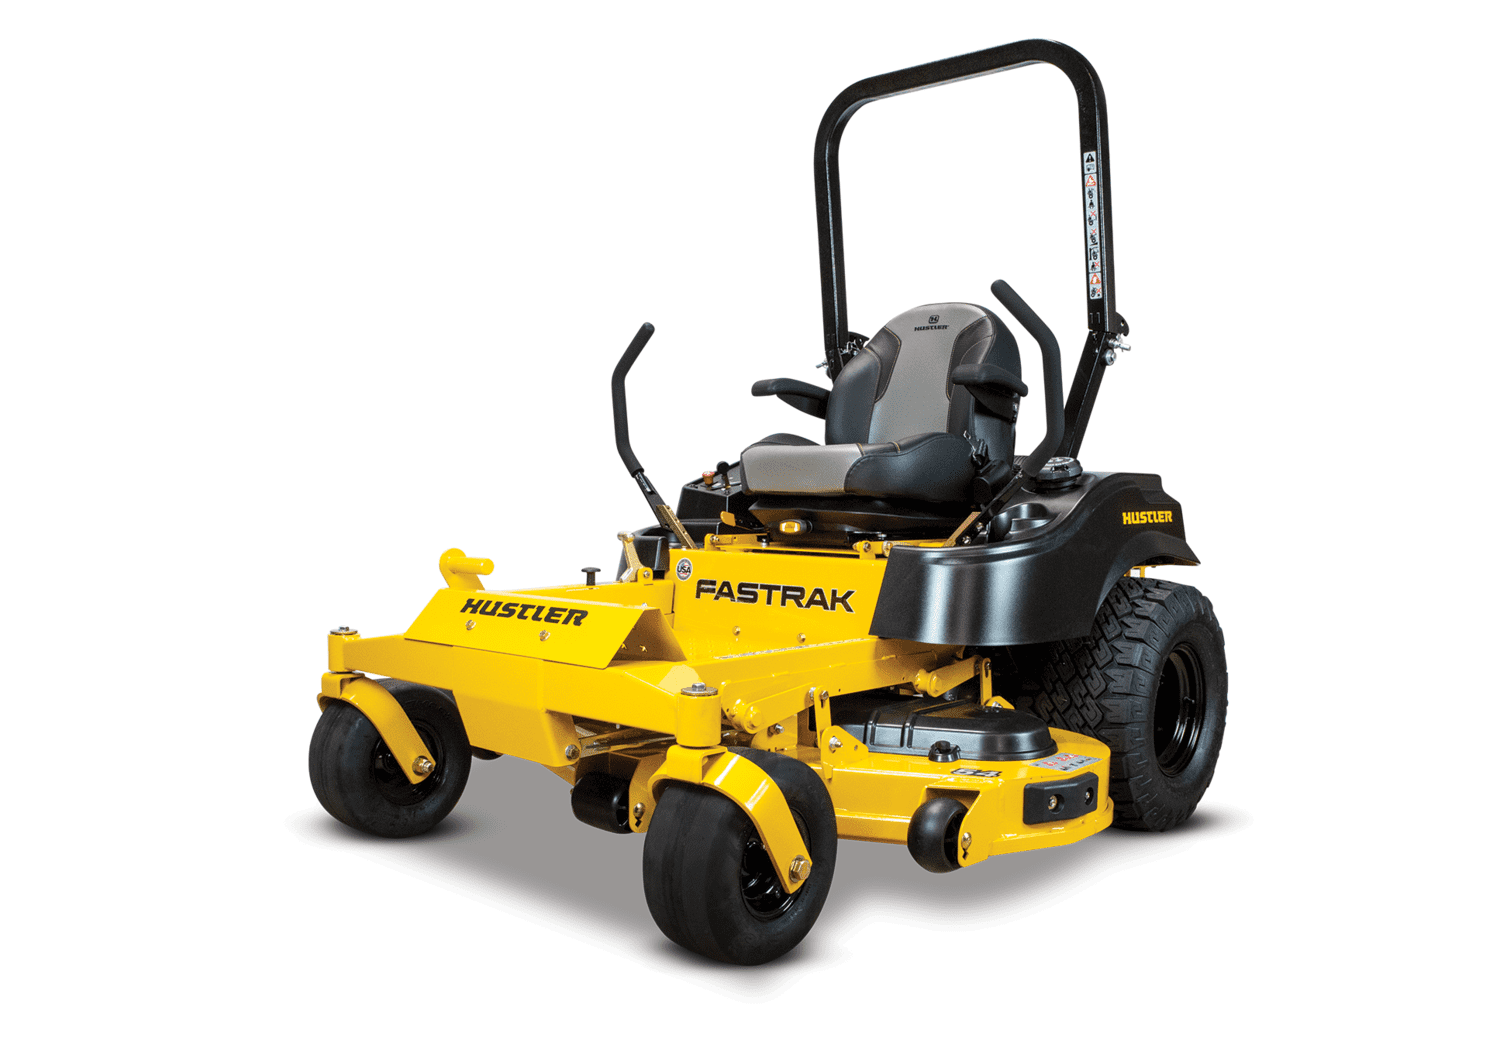 Lawn Mowers Gold Coast plus chainsaws and garden equipment from ...